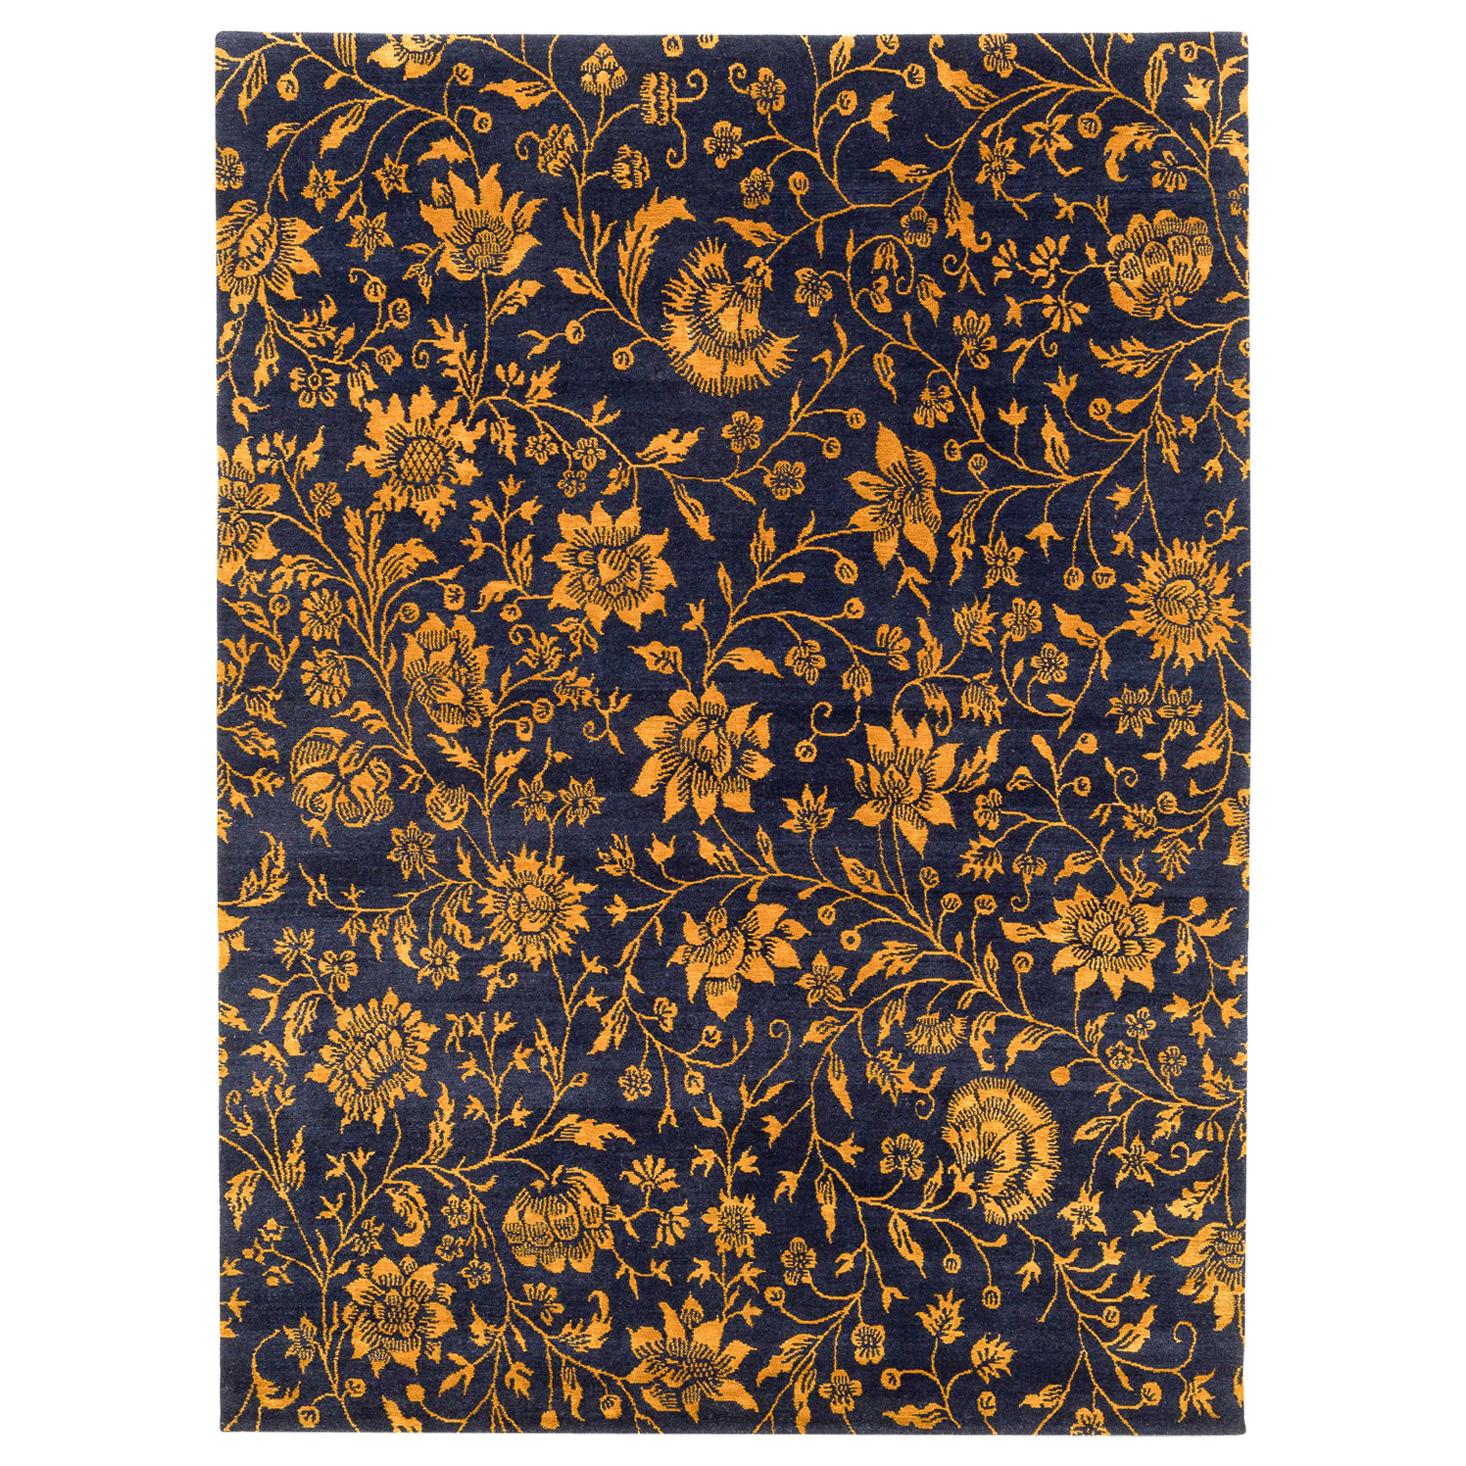 Deep Navy Blue and Gold Traditional Floral Rug